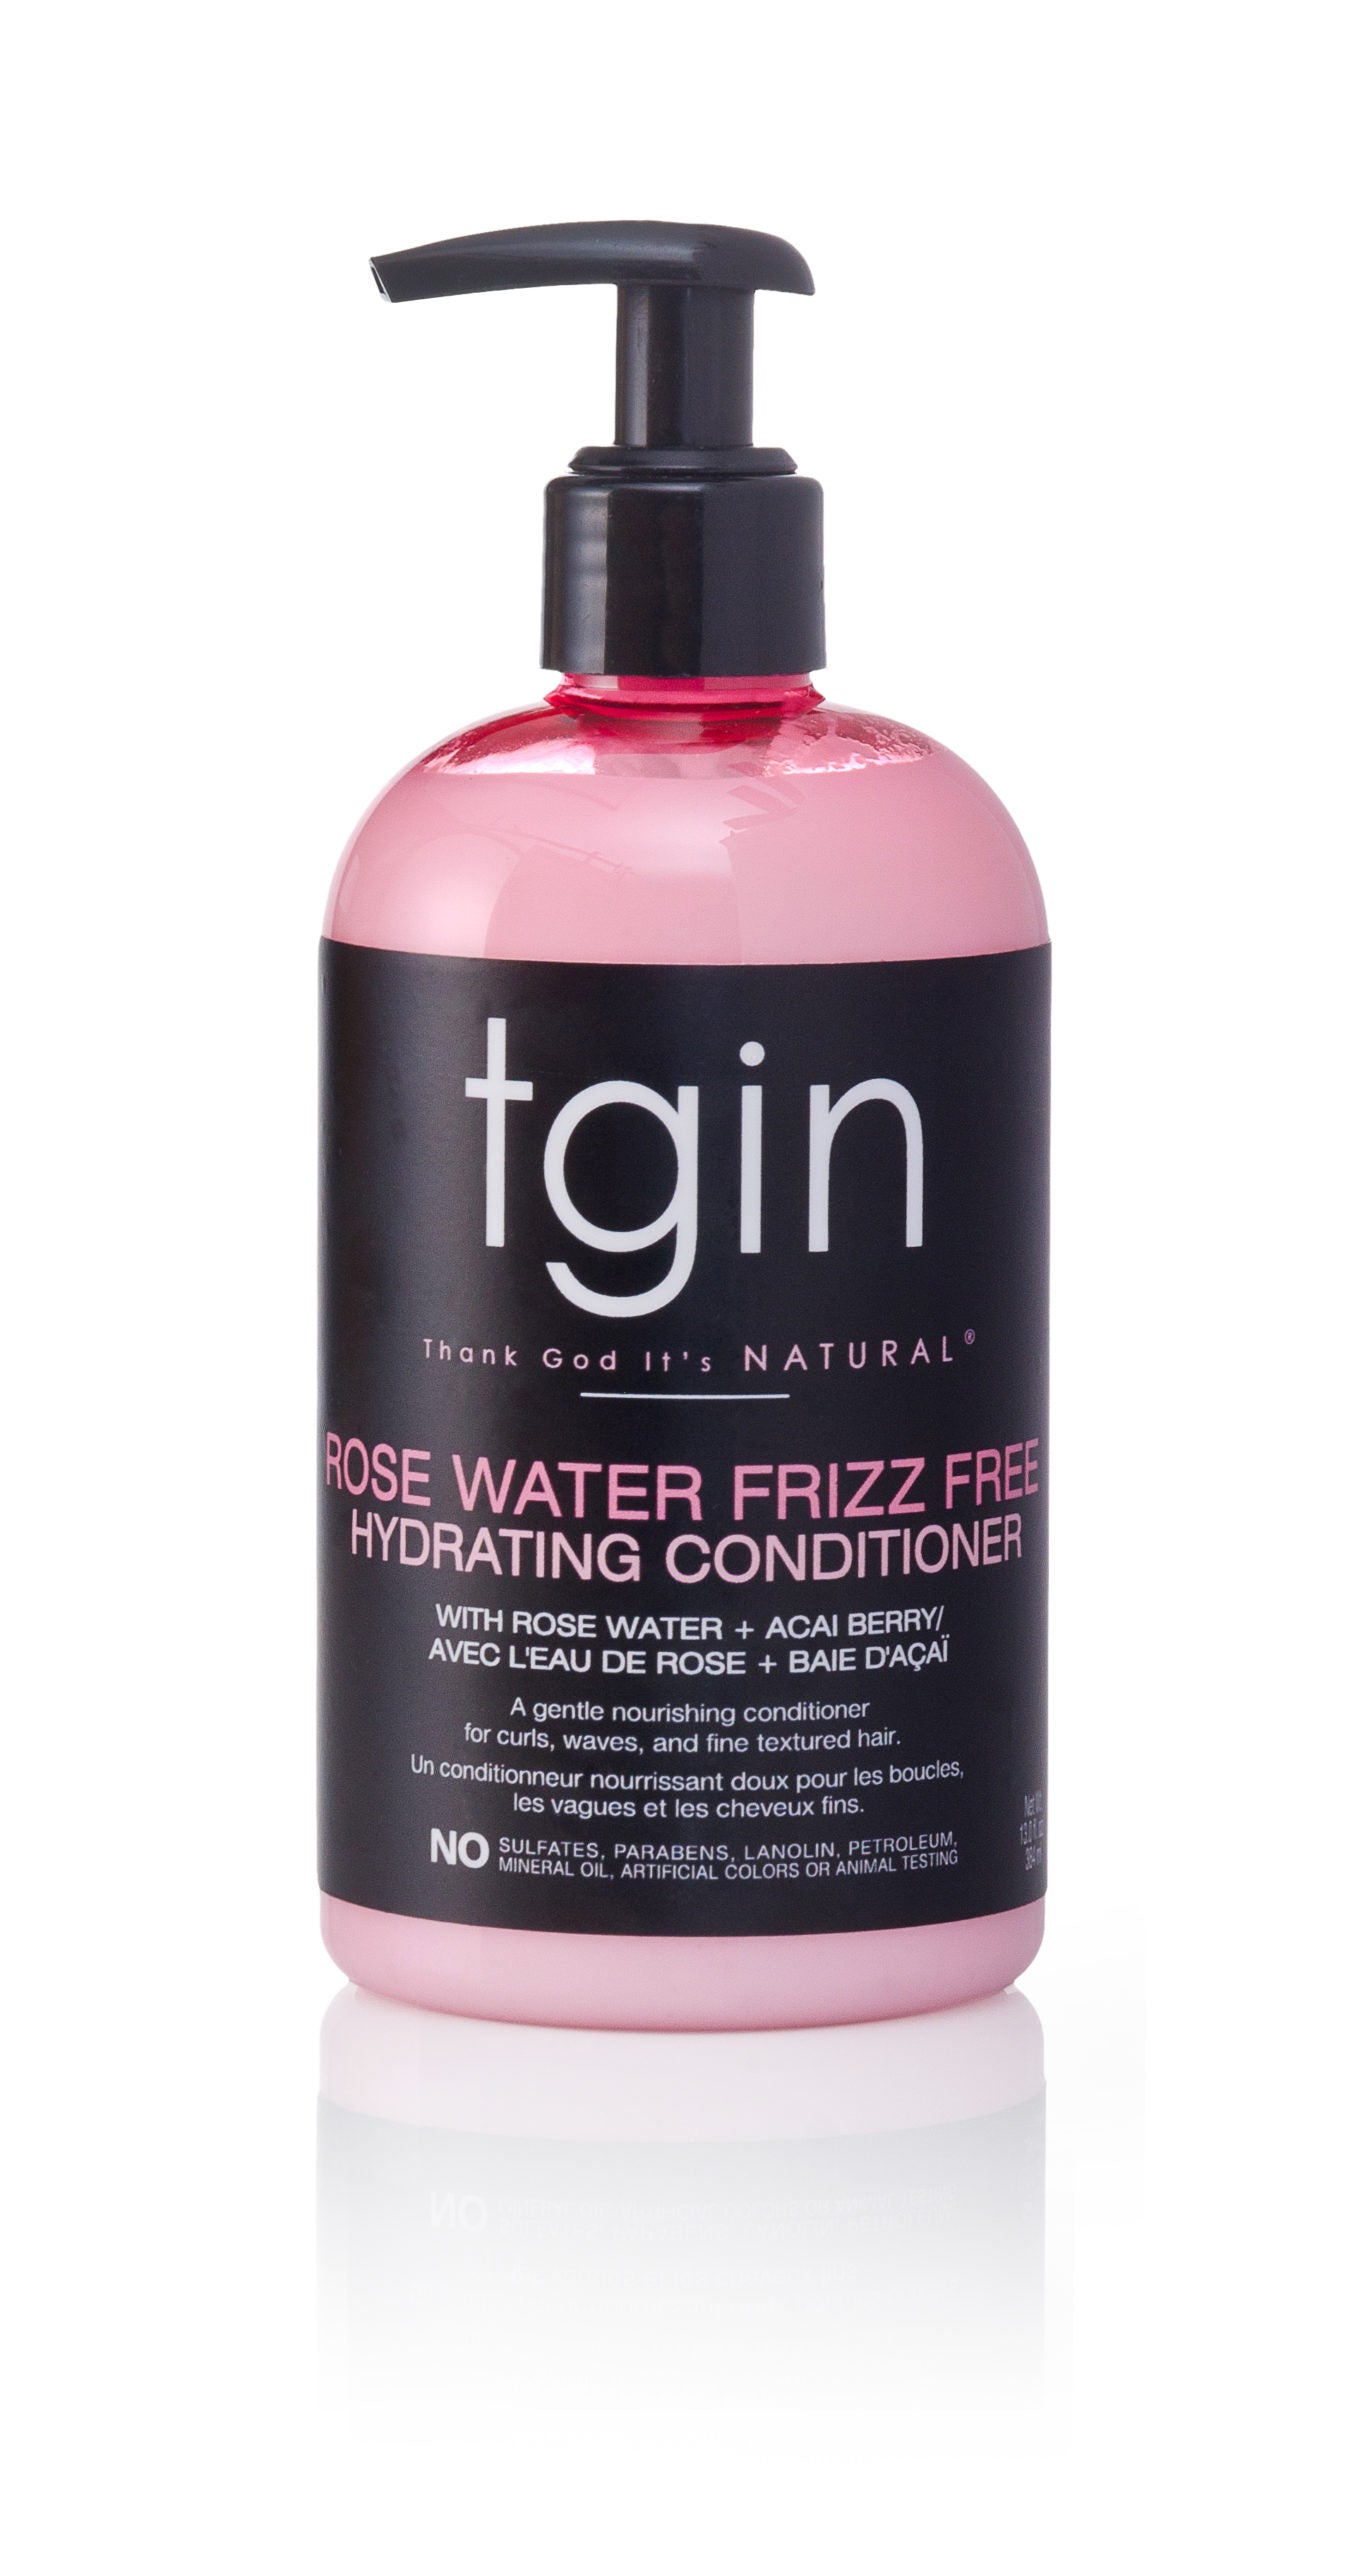 tgin Rose Water Frizz Free Hydrating Conditioner - 13oz